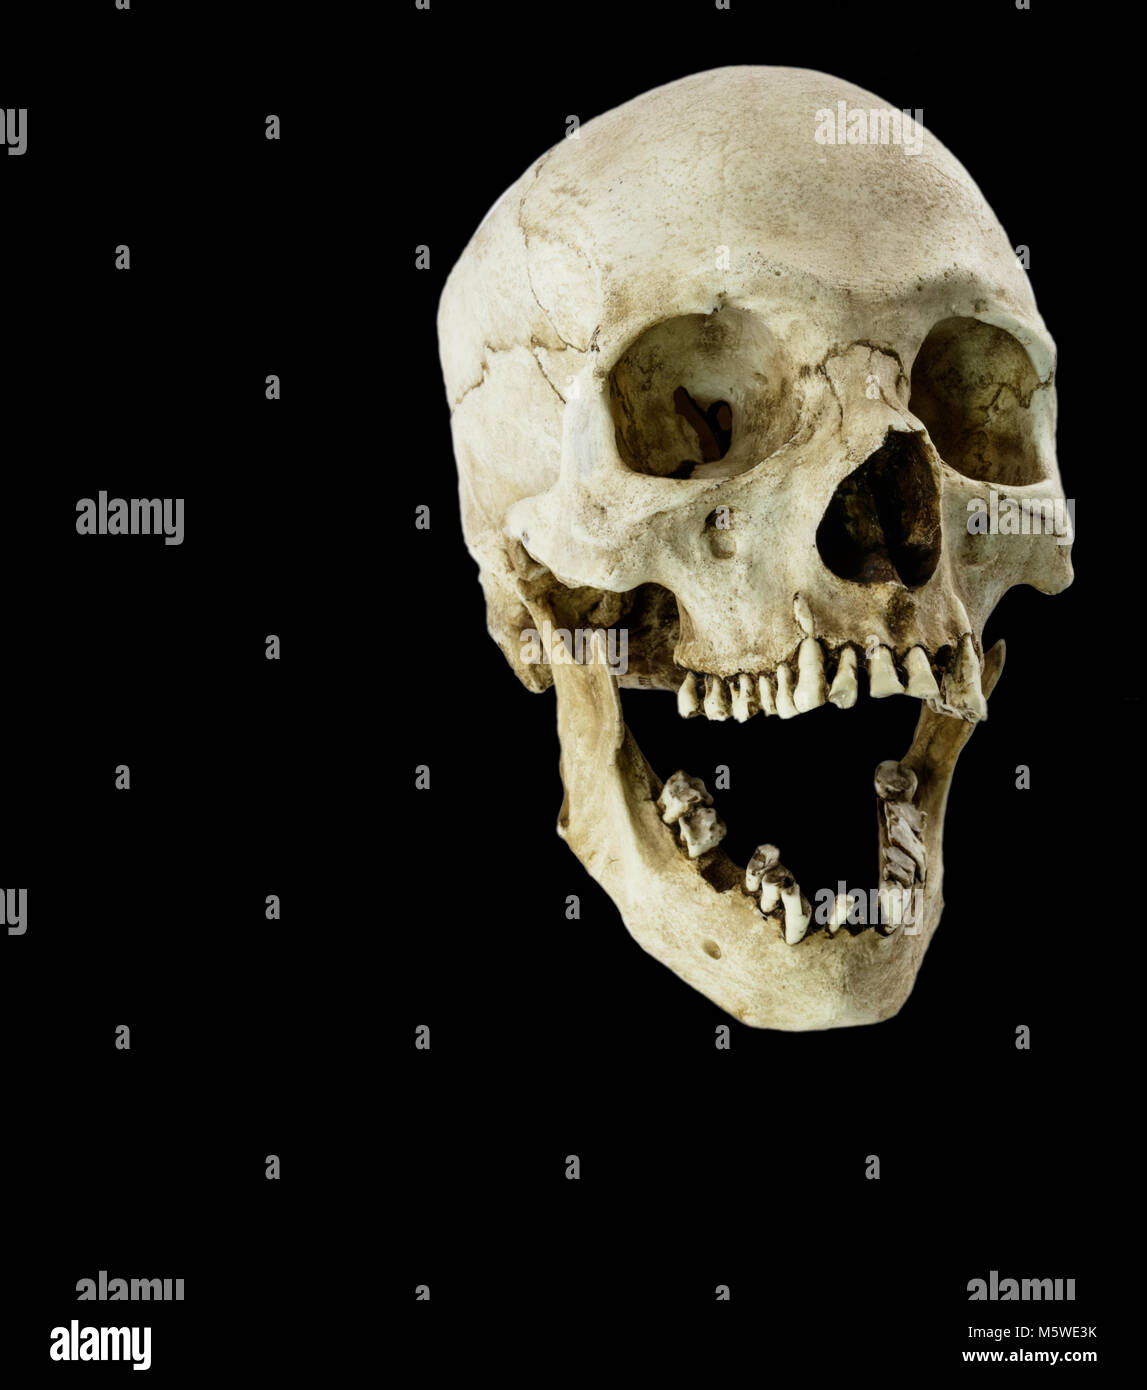 Fiberglass human skull with mouth wide open facing at a 45 degree angle Stock Photo